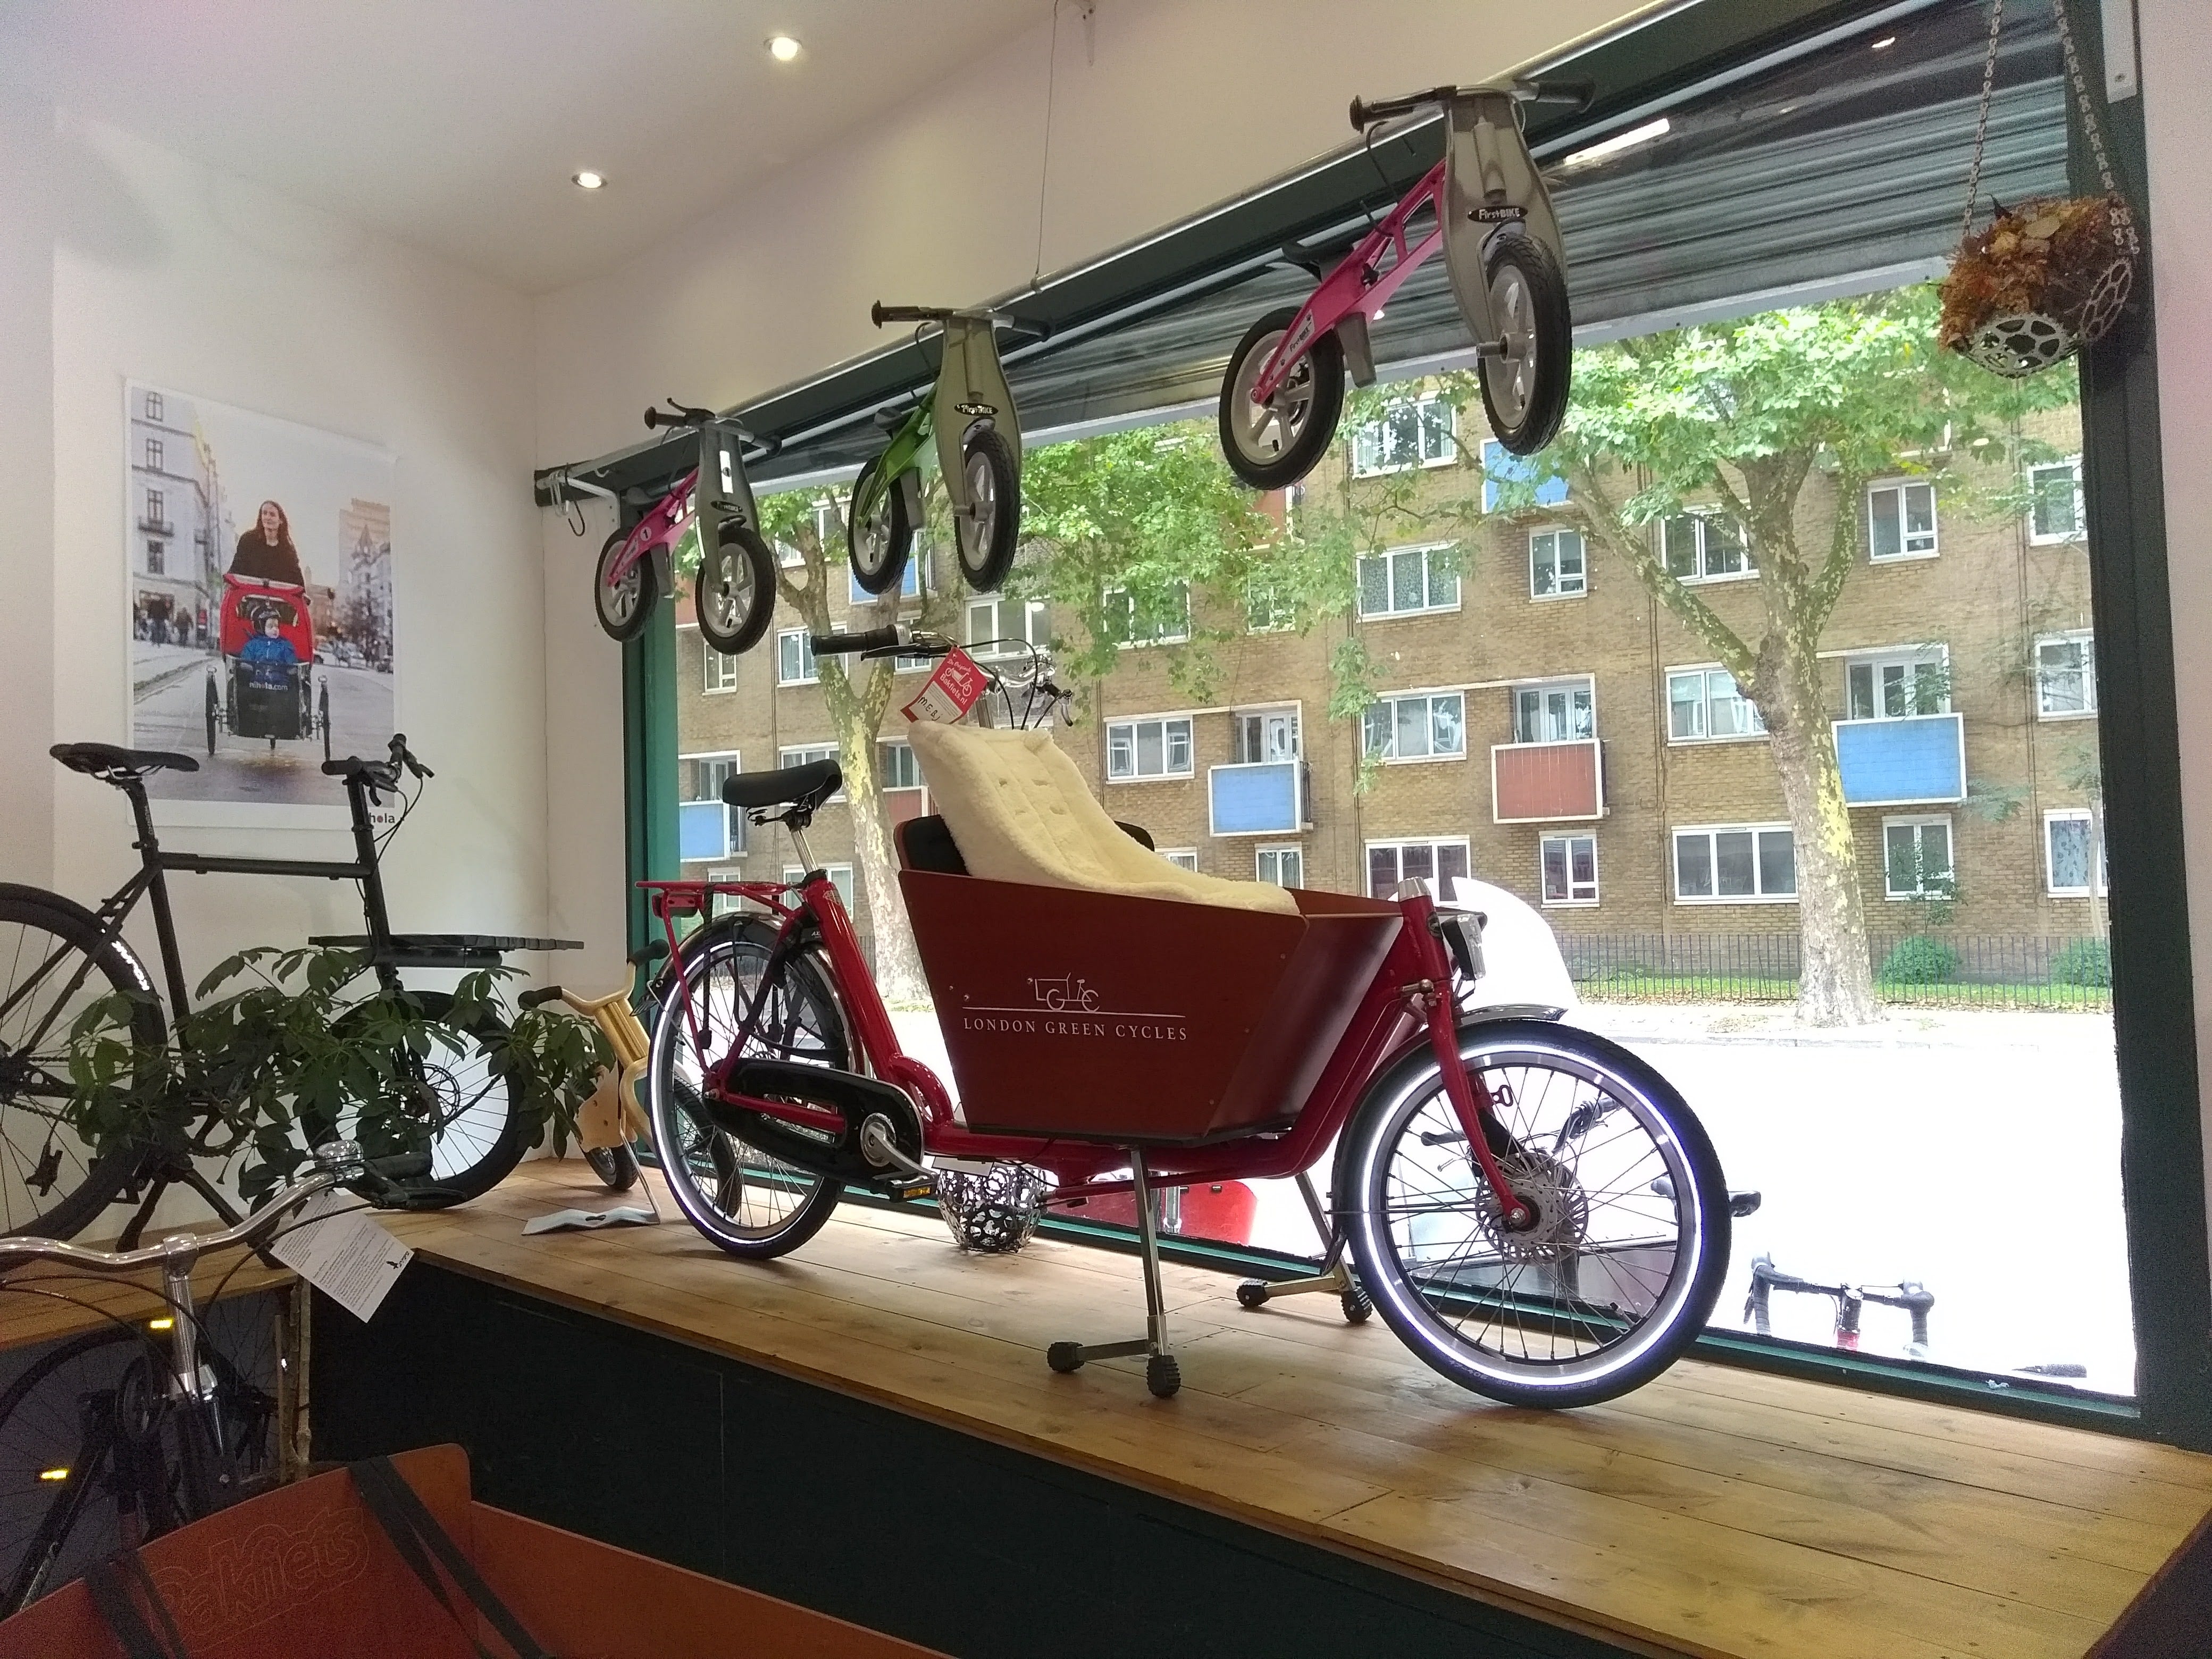 bakfiets second hand